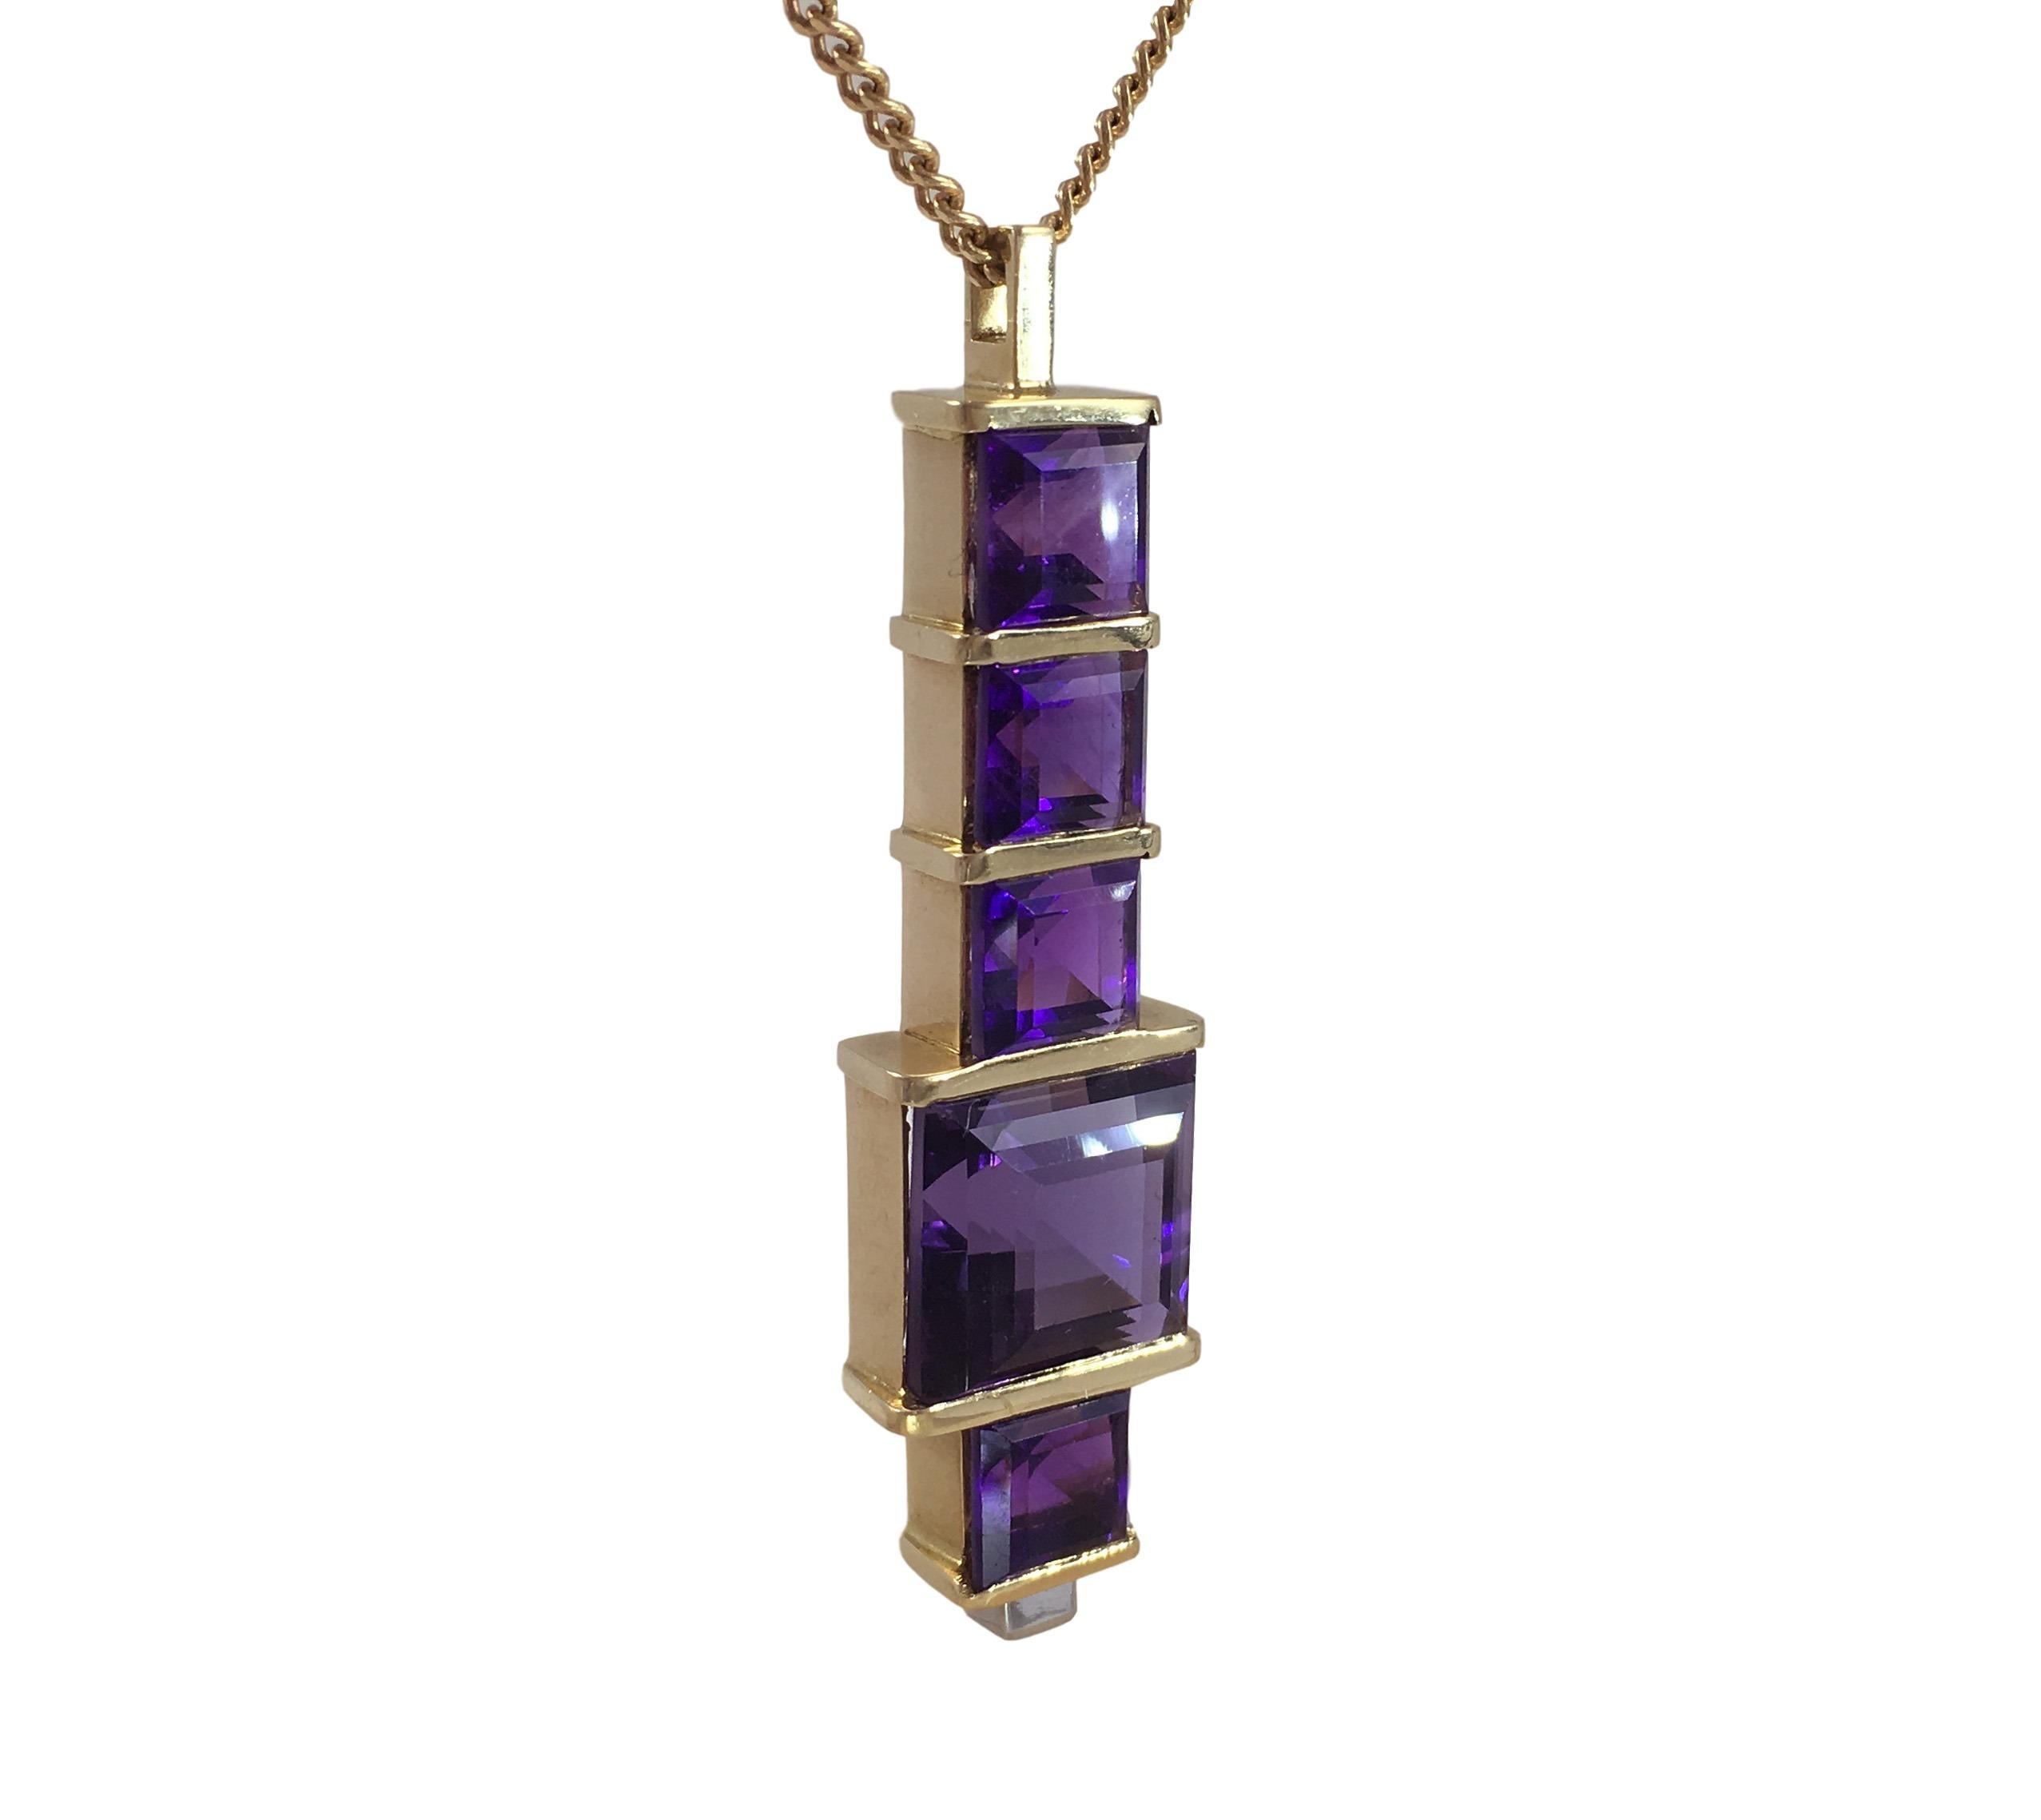 An 18 carat gold pendant set with five square step cut amethysts with a deep saturated pinkish-violet colour tension set between gold bars. The base of the pendant is set with a single square step cut diamond with E-F colour and VVS clarity.

The